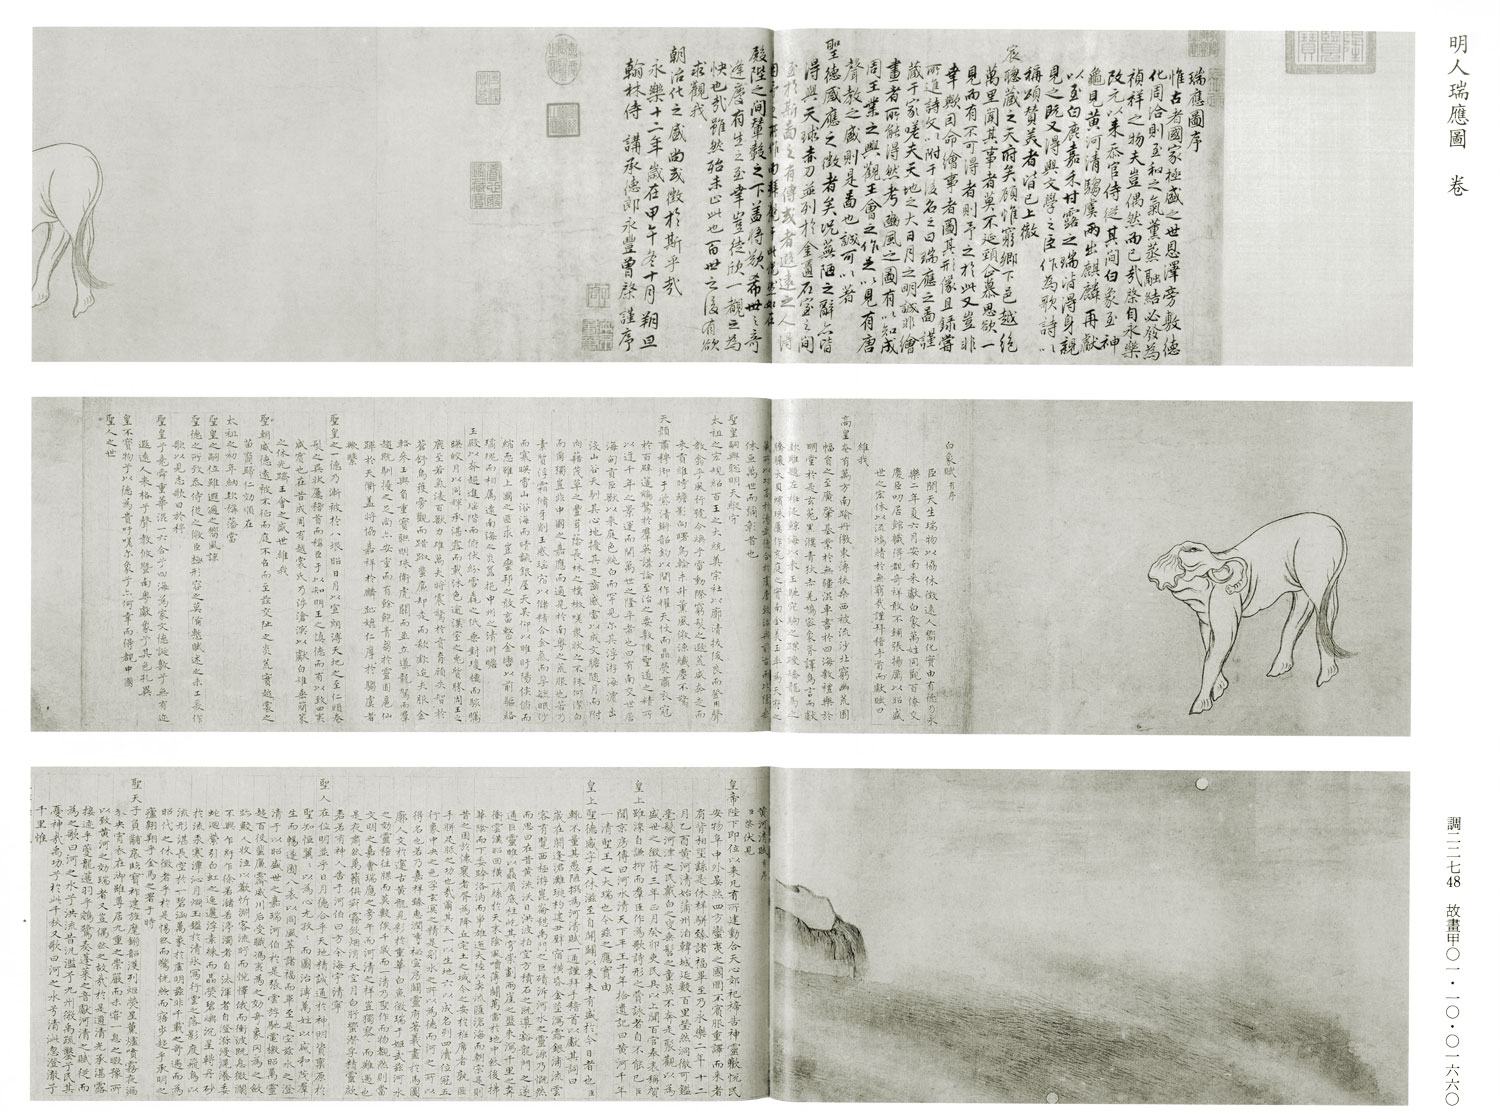 Three spreads from a book: at the top, the hindquarters of some kind of ruminant on the left, Chinese text on the right; in the middle, Chinese text on the left, an elephant walking leftward on the right; at the bottom, Chinese text on the left, an indistinct landscape on the right